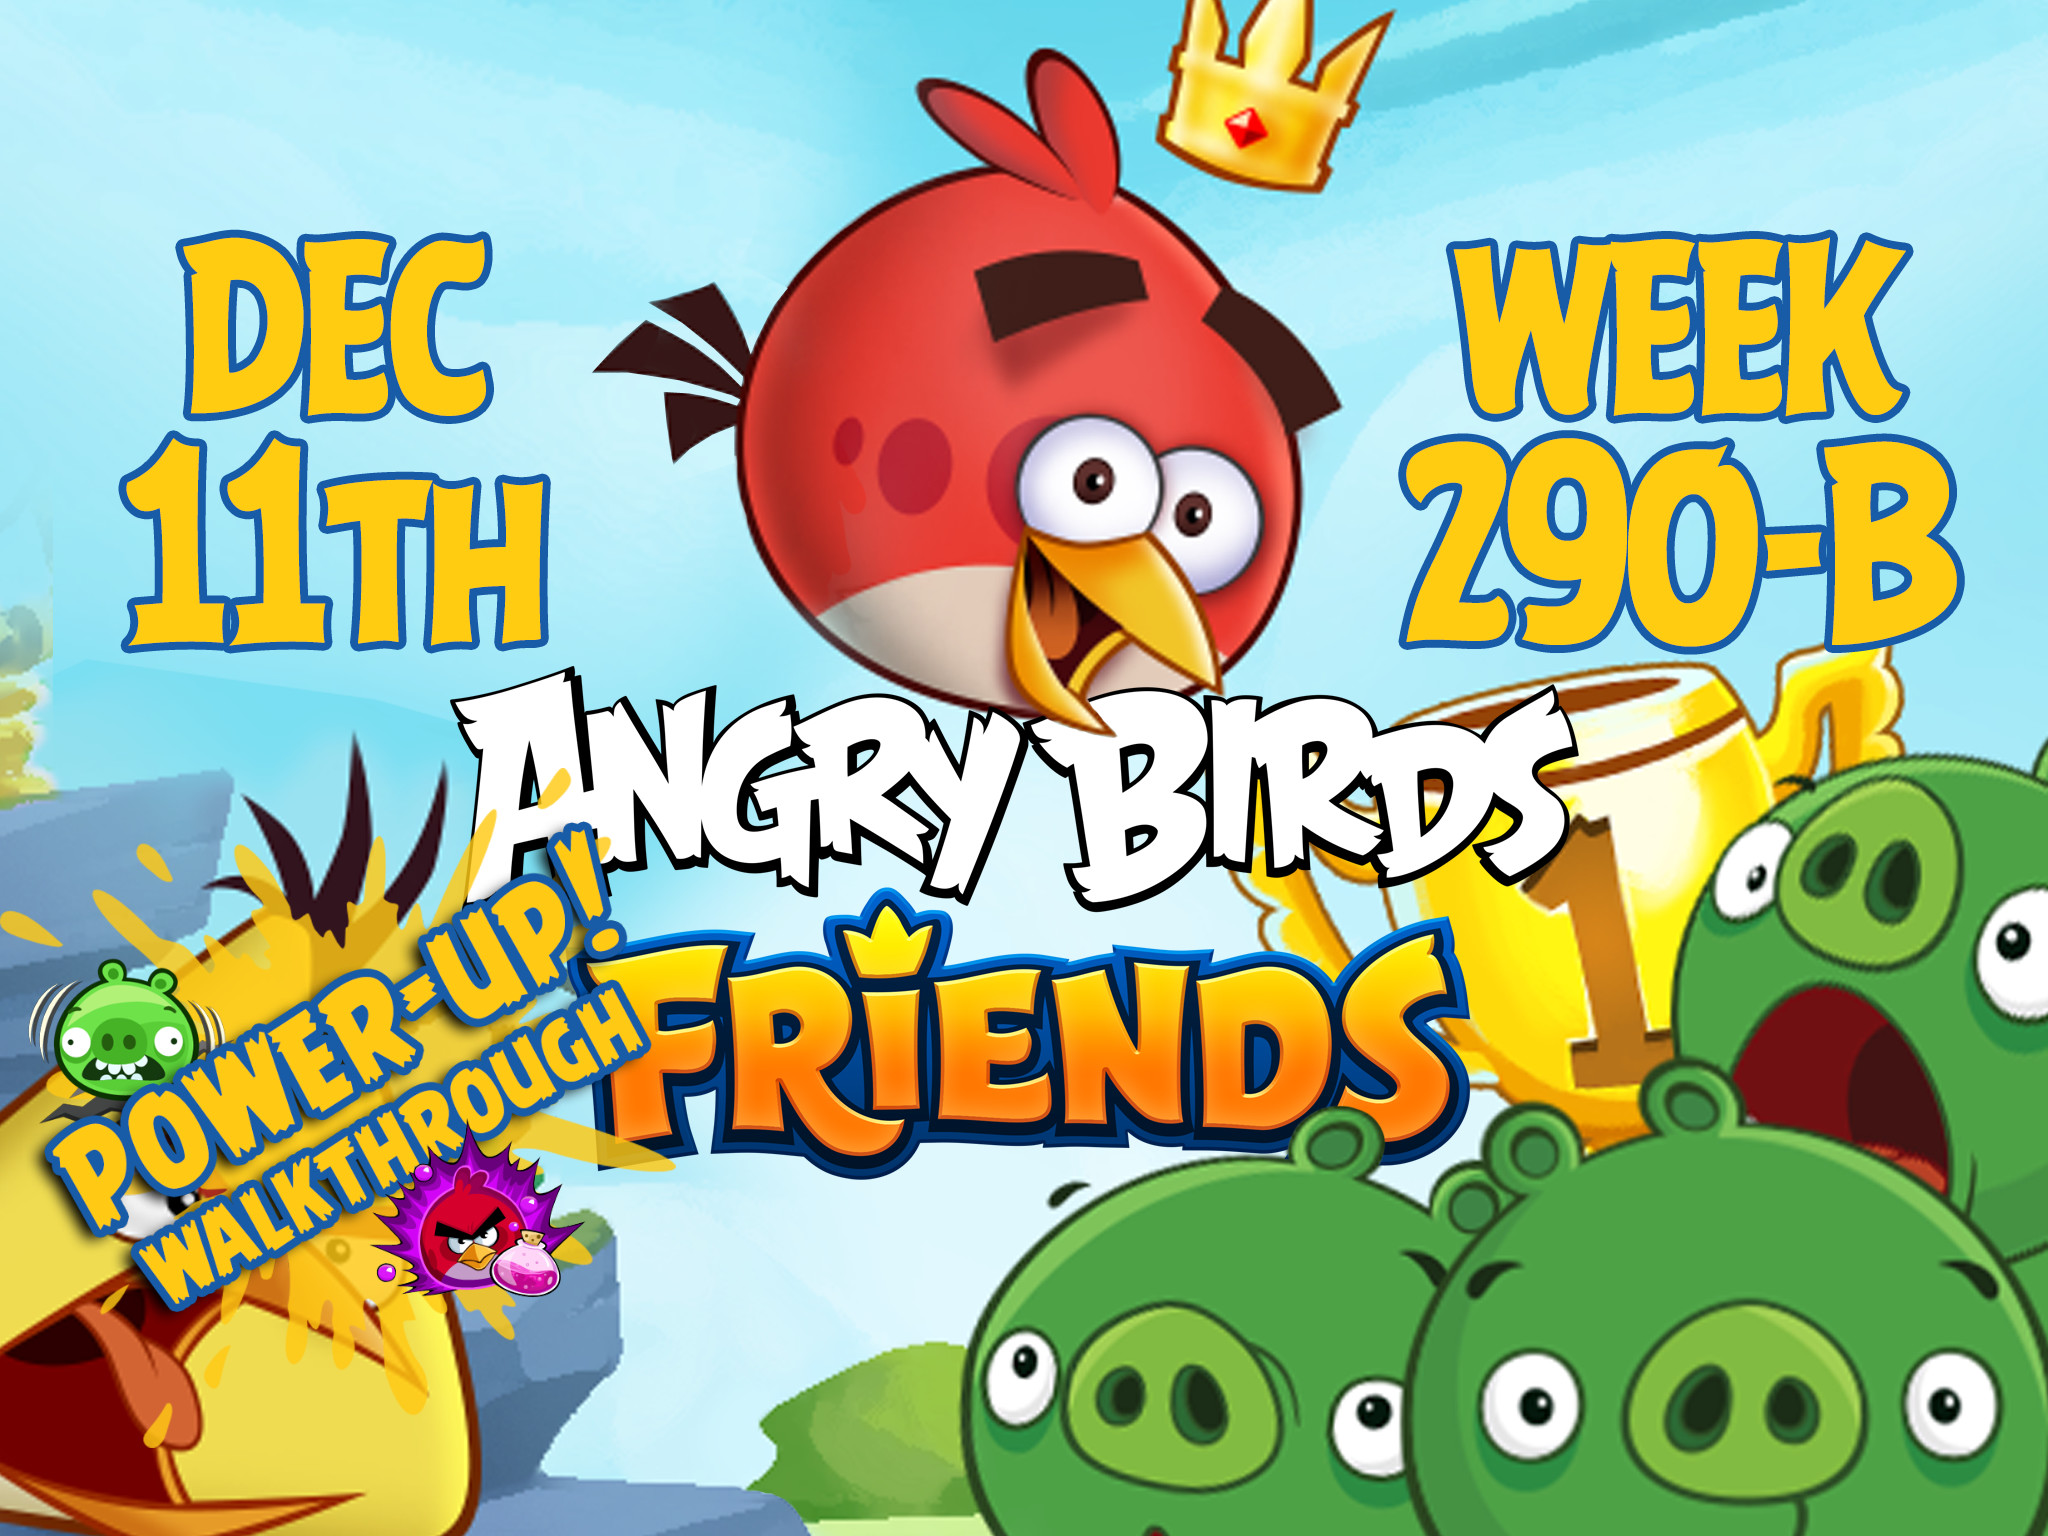 Angry Birds Friends Tournament Week 290-B Feature Image PU